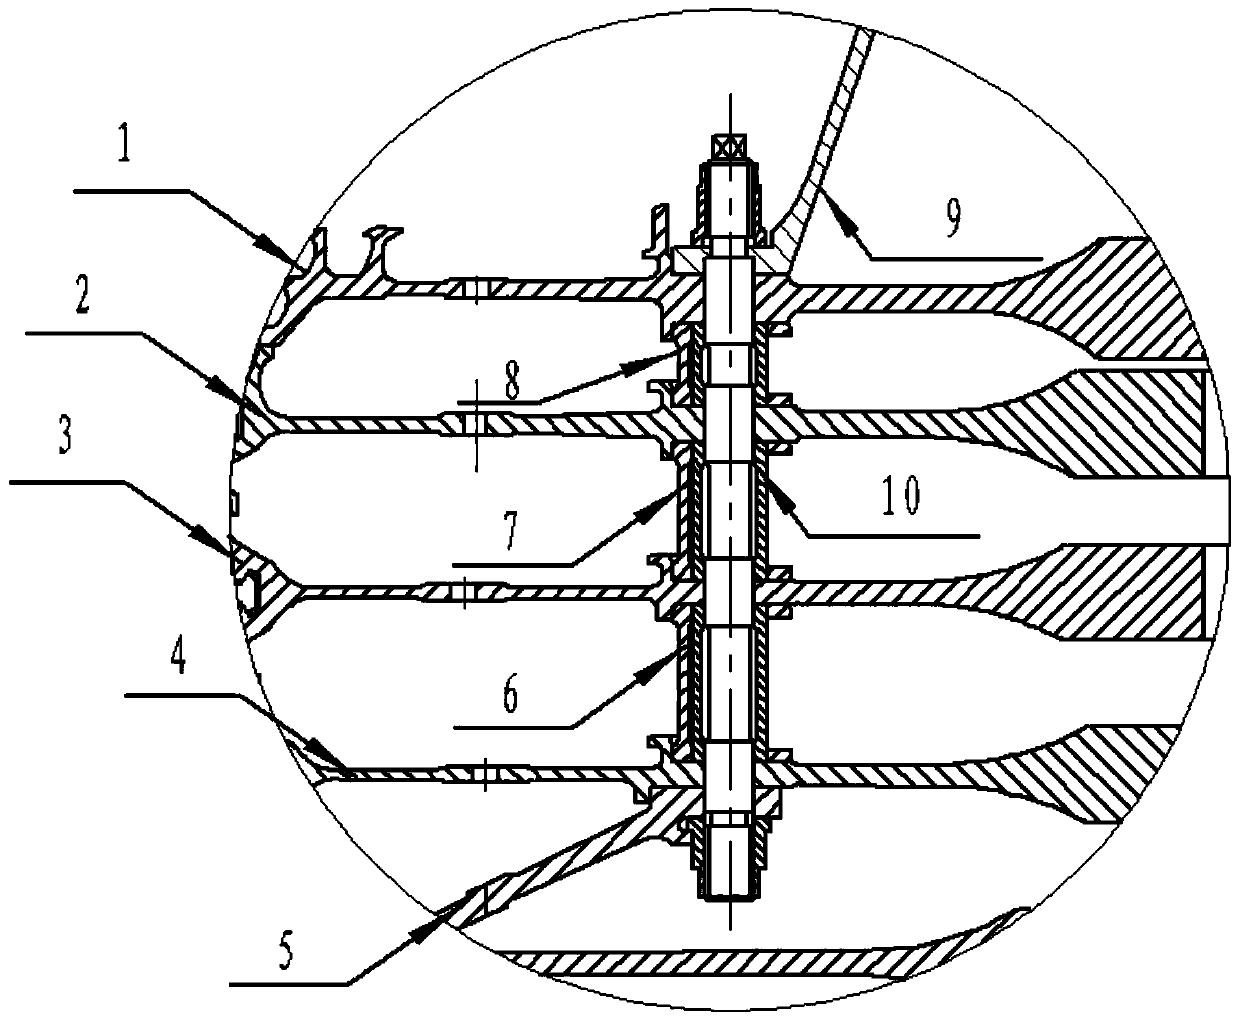 Method for checking assembling flexibility of long bolts between high-pressure rotor discs